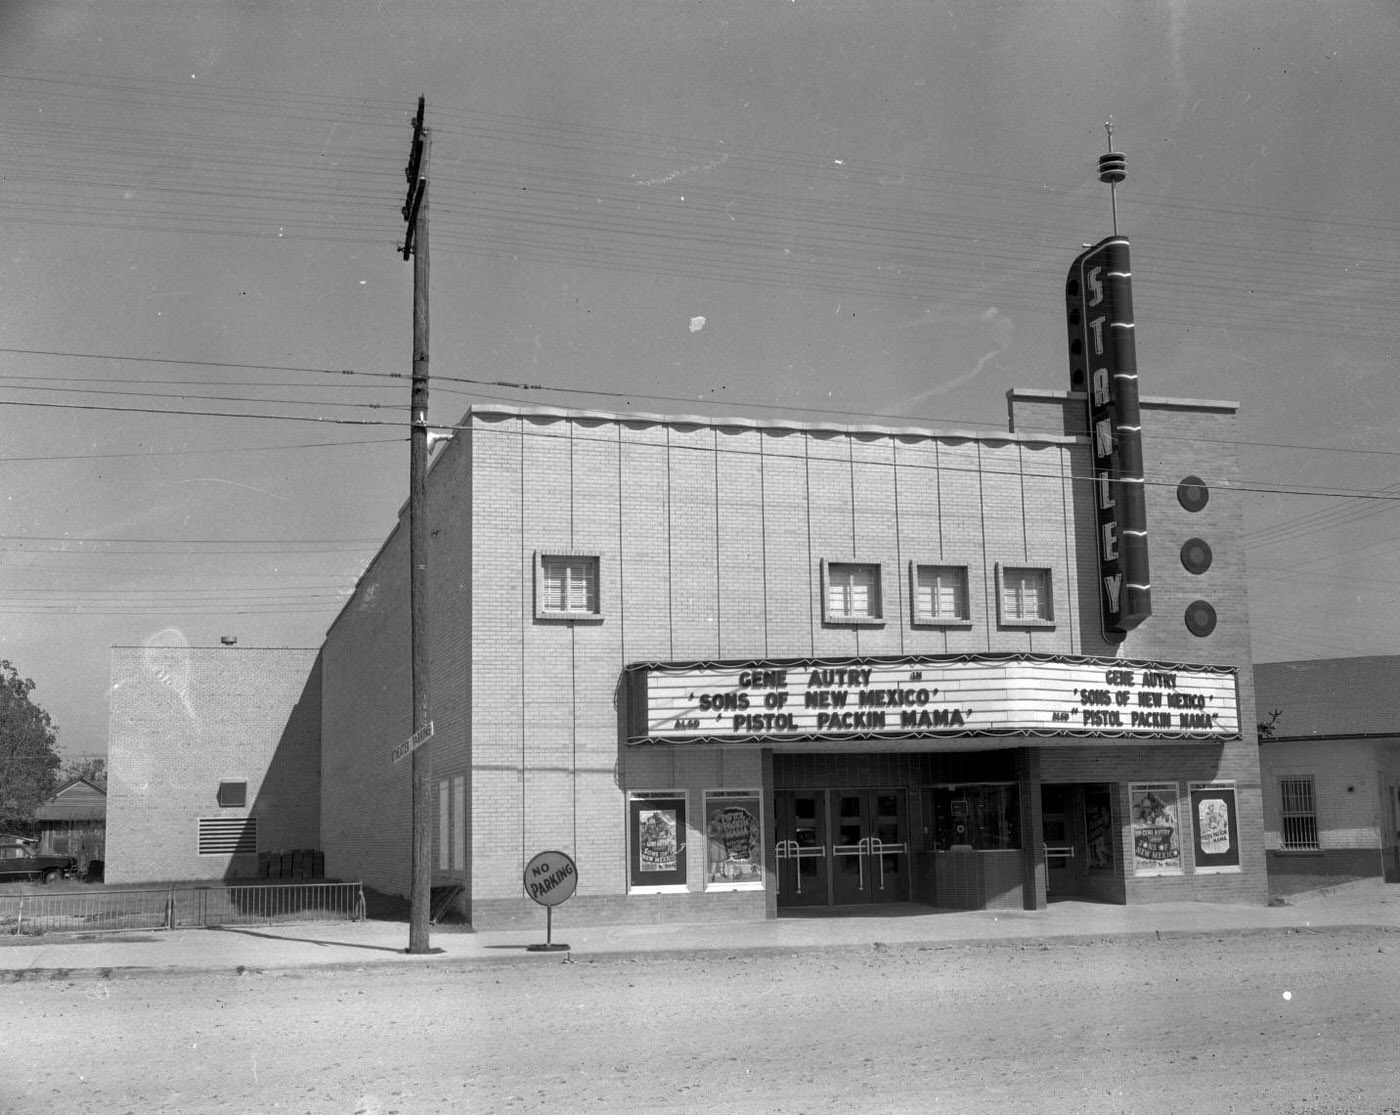 Stanley Theater in Luling, Texas Showing Gene Autry Movies, 1950.